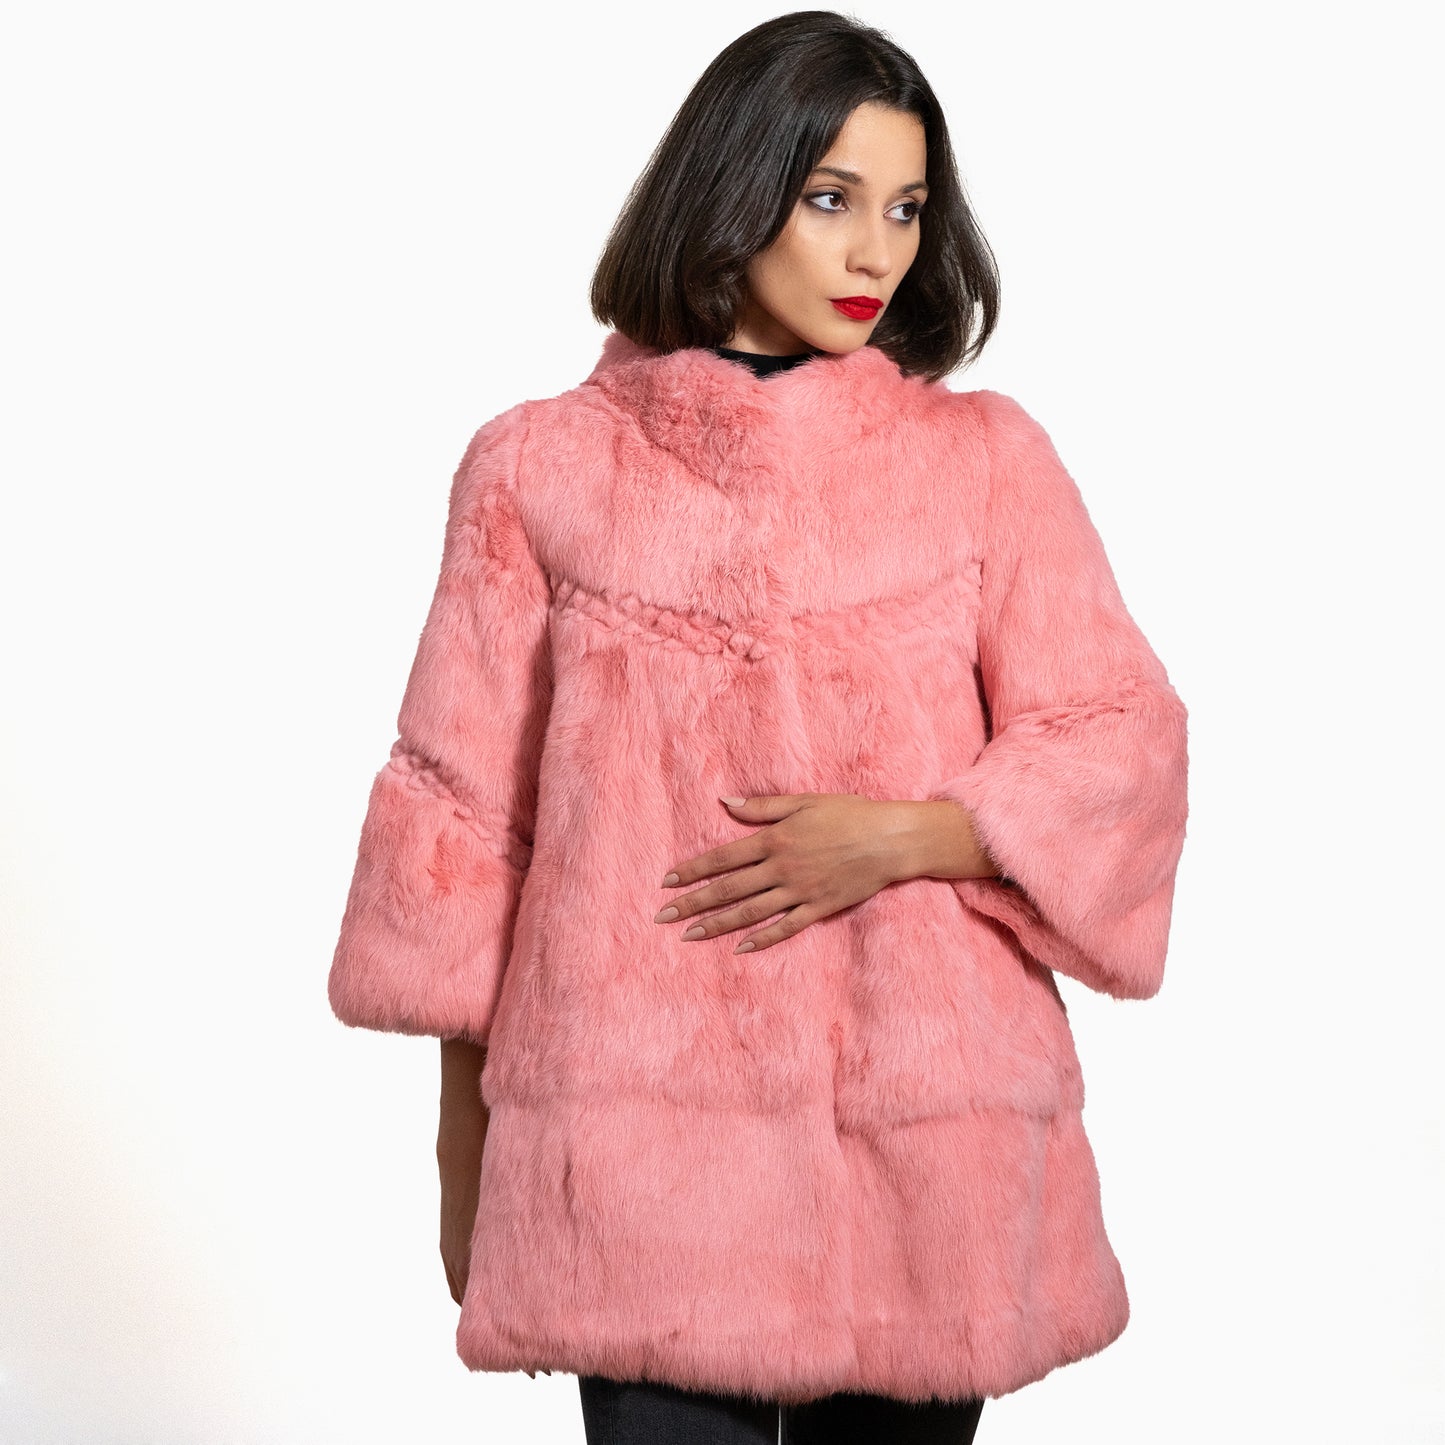 trending pink rabbit fur jacket with sheared details 